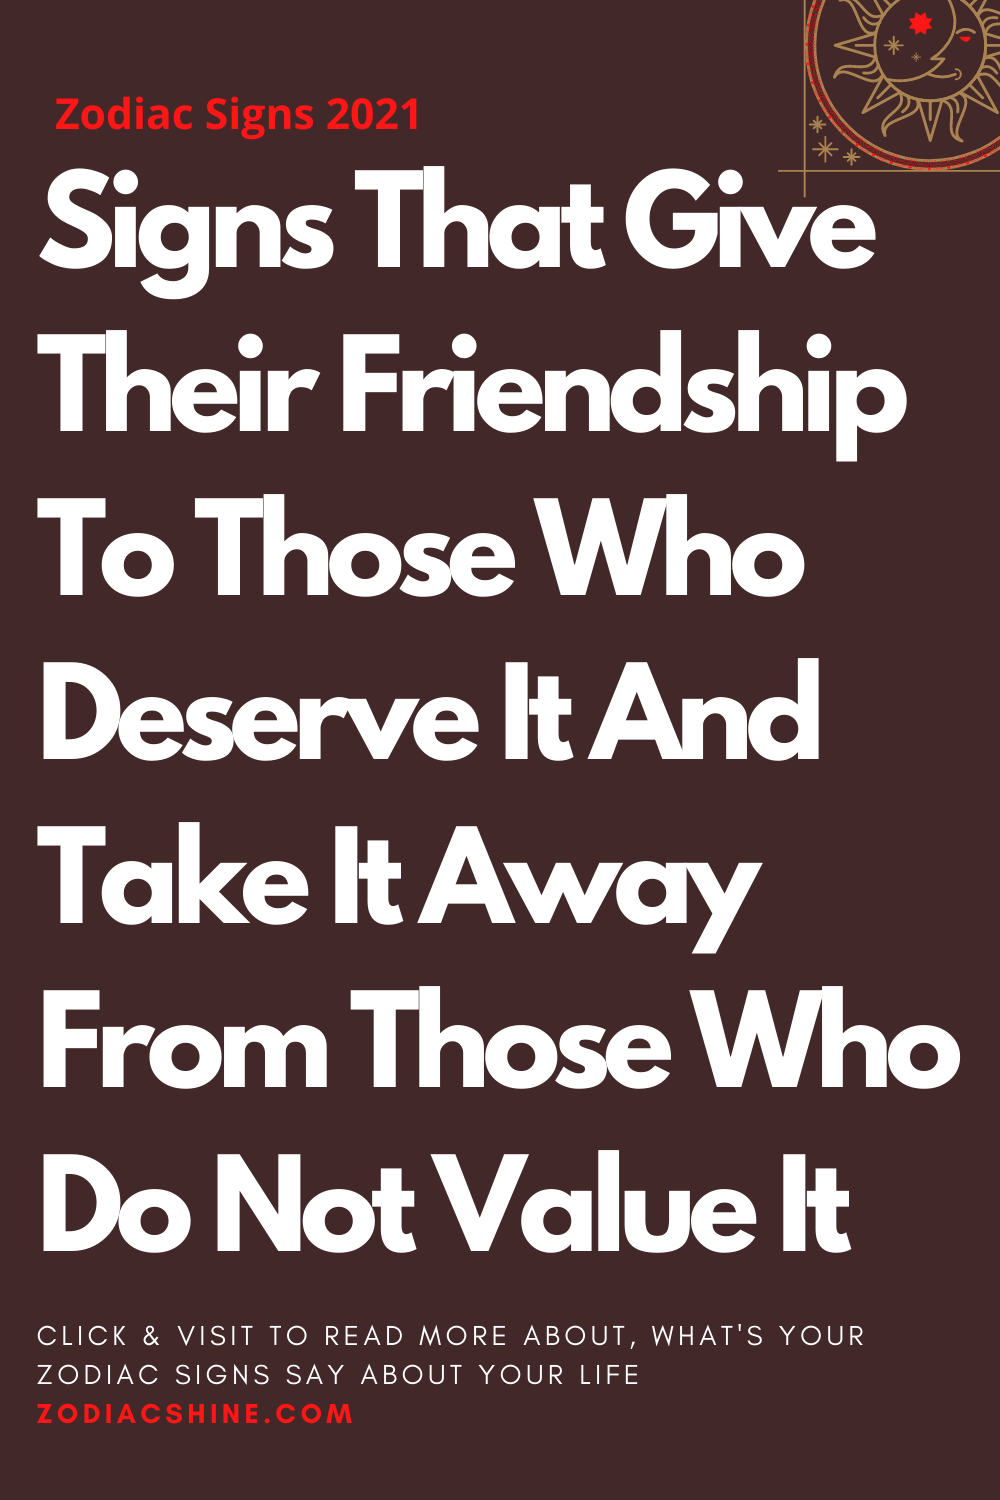 Signs That Give Their Friendship To Those Who Deserve It And Take It Away From Those Who Do Not Value It